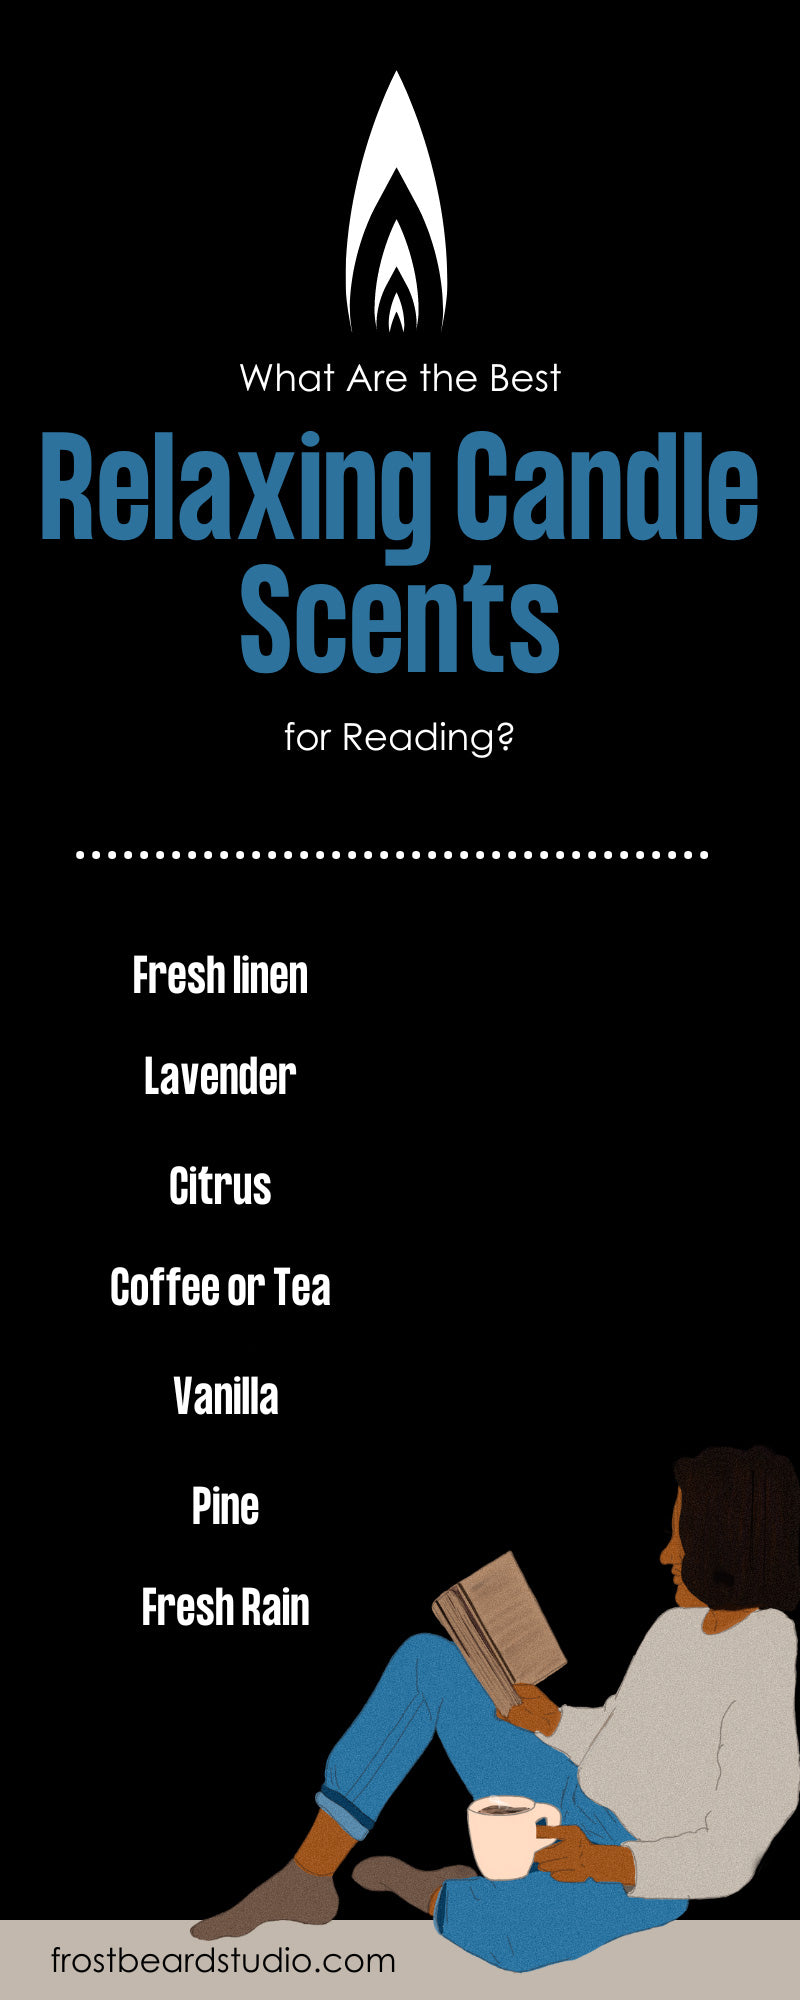 What Are the Best Relaxing Candle Scents for Reading?